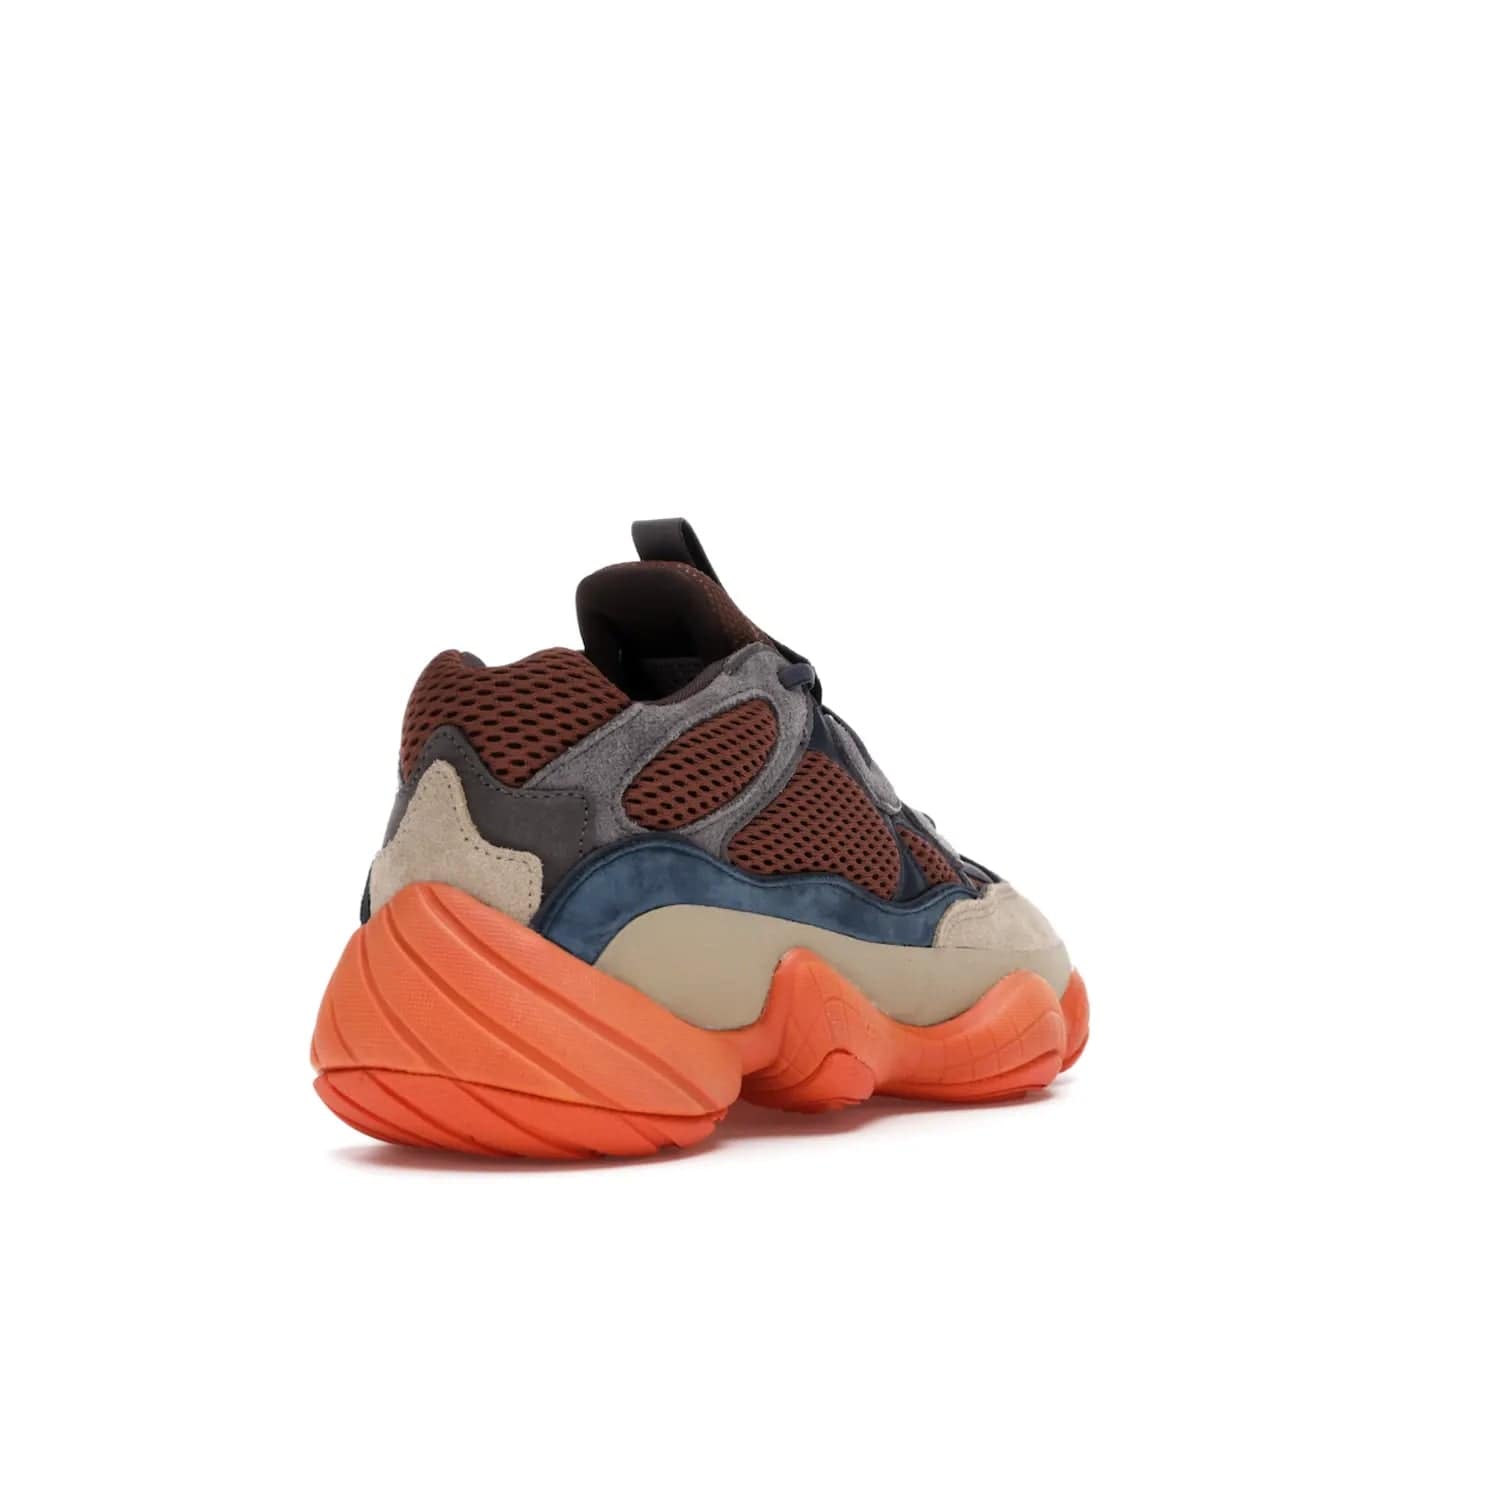 adidas Yeezy 500 Enflame - Image 31 - Only at www.BallersClubKickz.com - Step into style with the adidas Yeezy 500 Enflame. Mix of mesh, leather, and suede layered together to create tonal-brown, dark blue, & orange. Orange AdiPRENE sole provides superior cushioning & comfort. Get yours and experience maximum style.